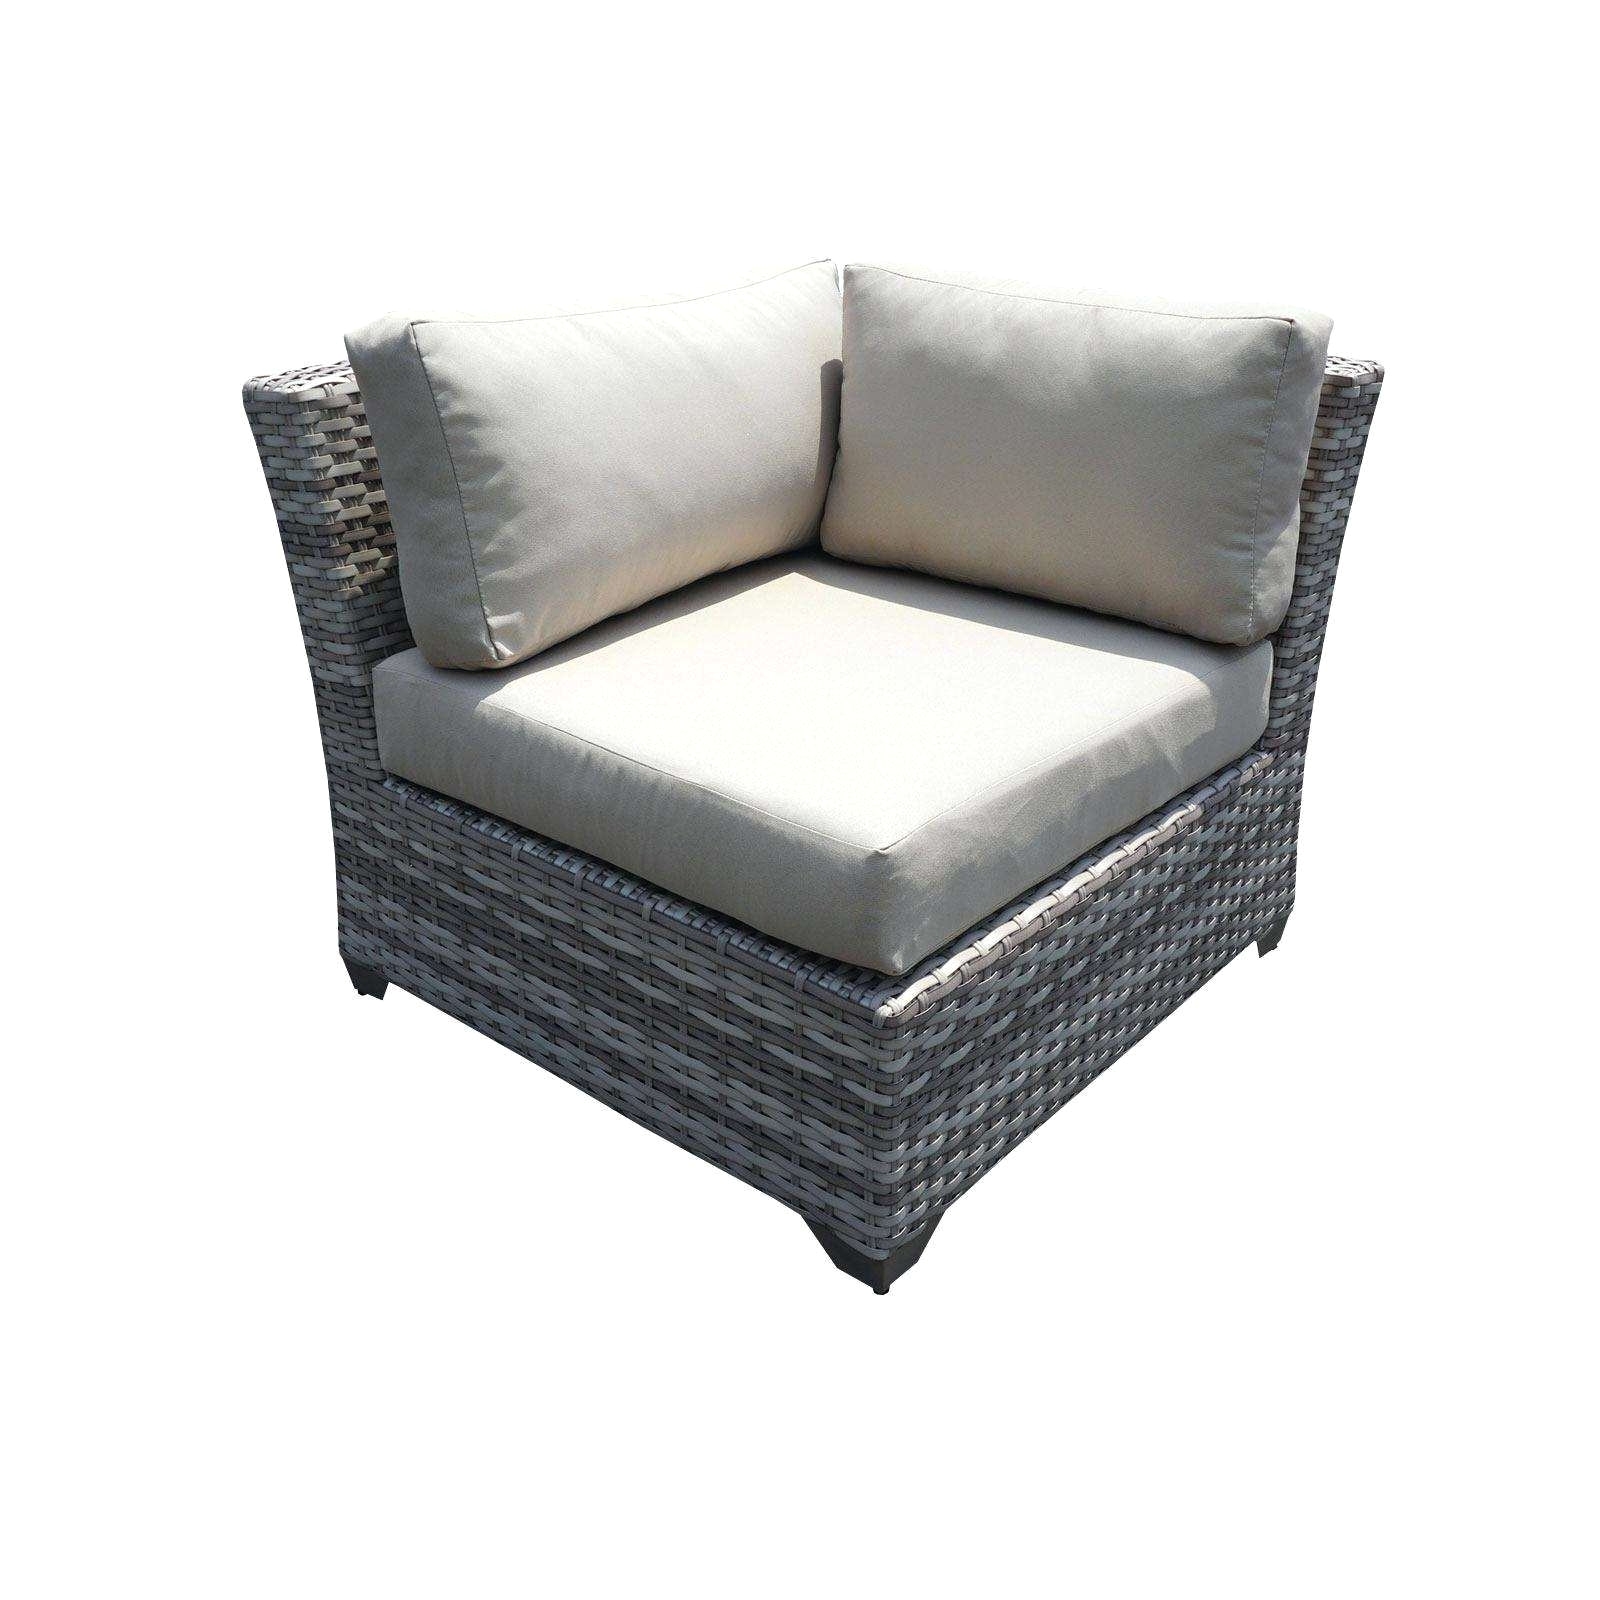 furniture stores in pittsburgh patio furniture stores near me lovely wicker outdoor sofa 0d patio